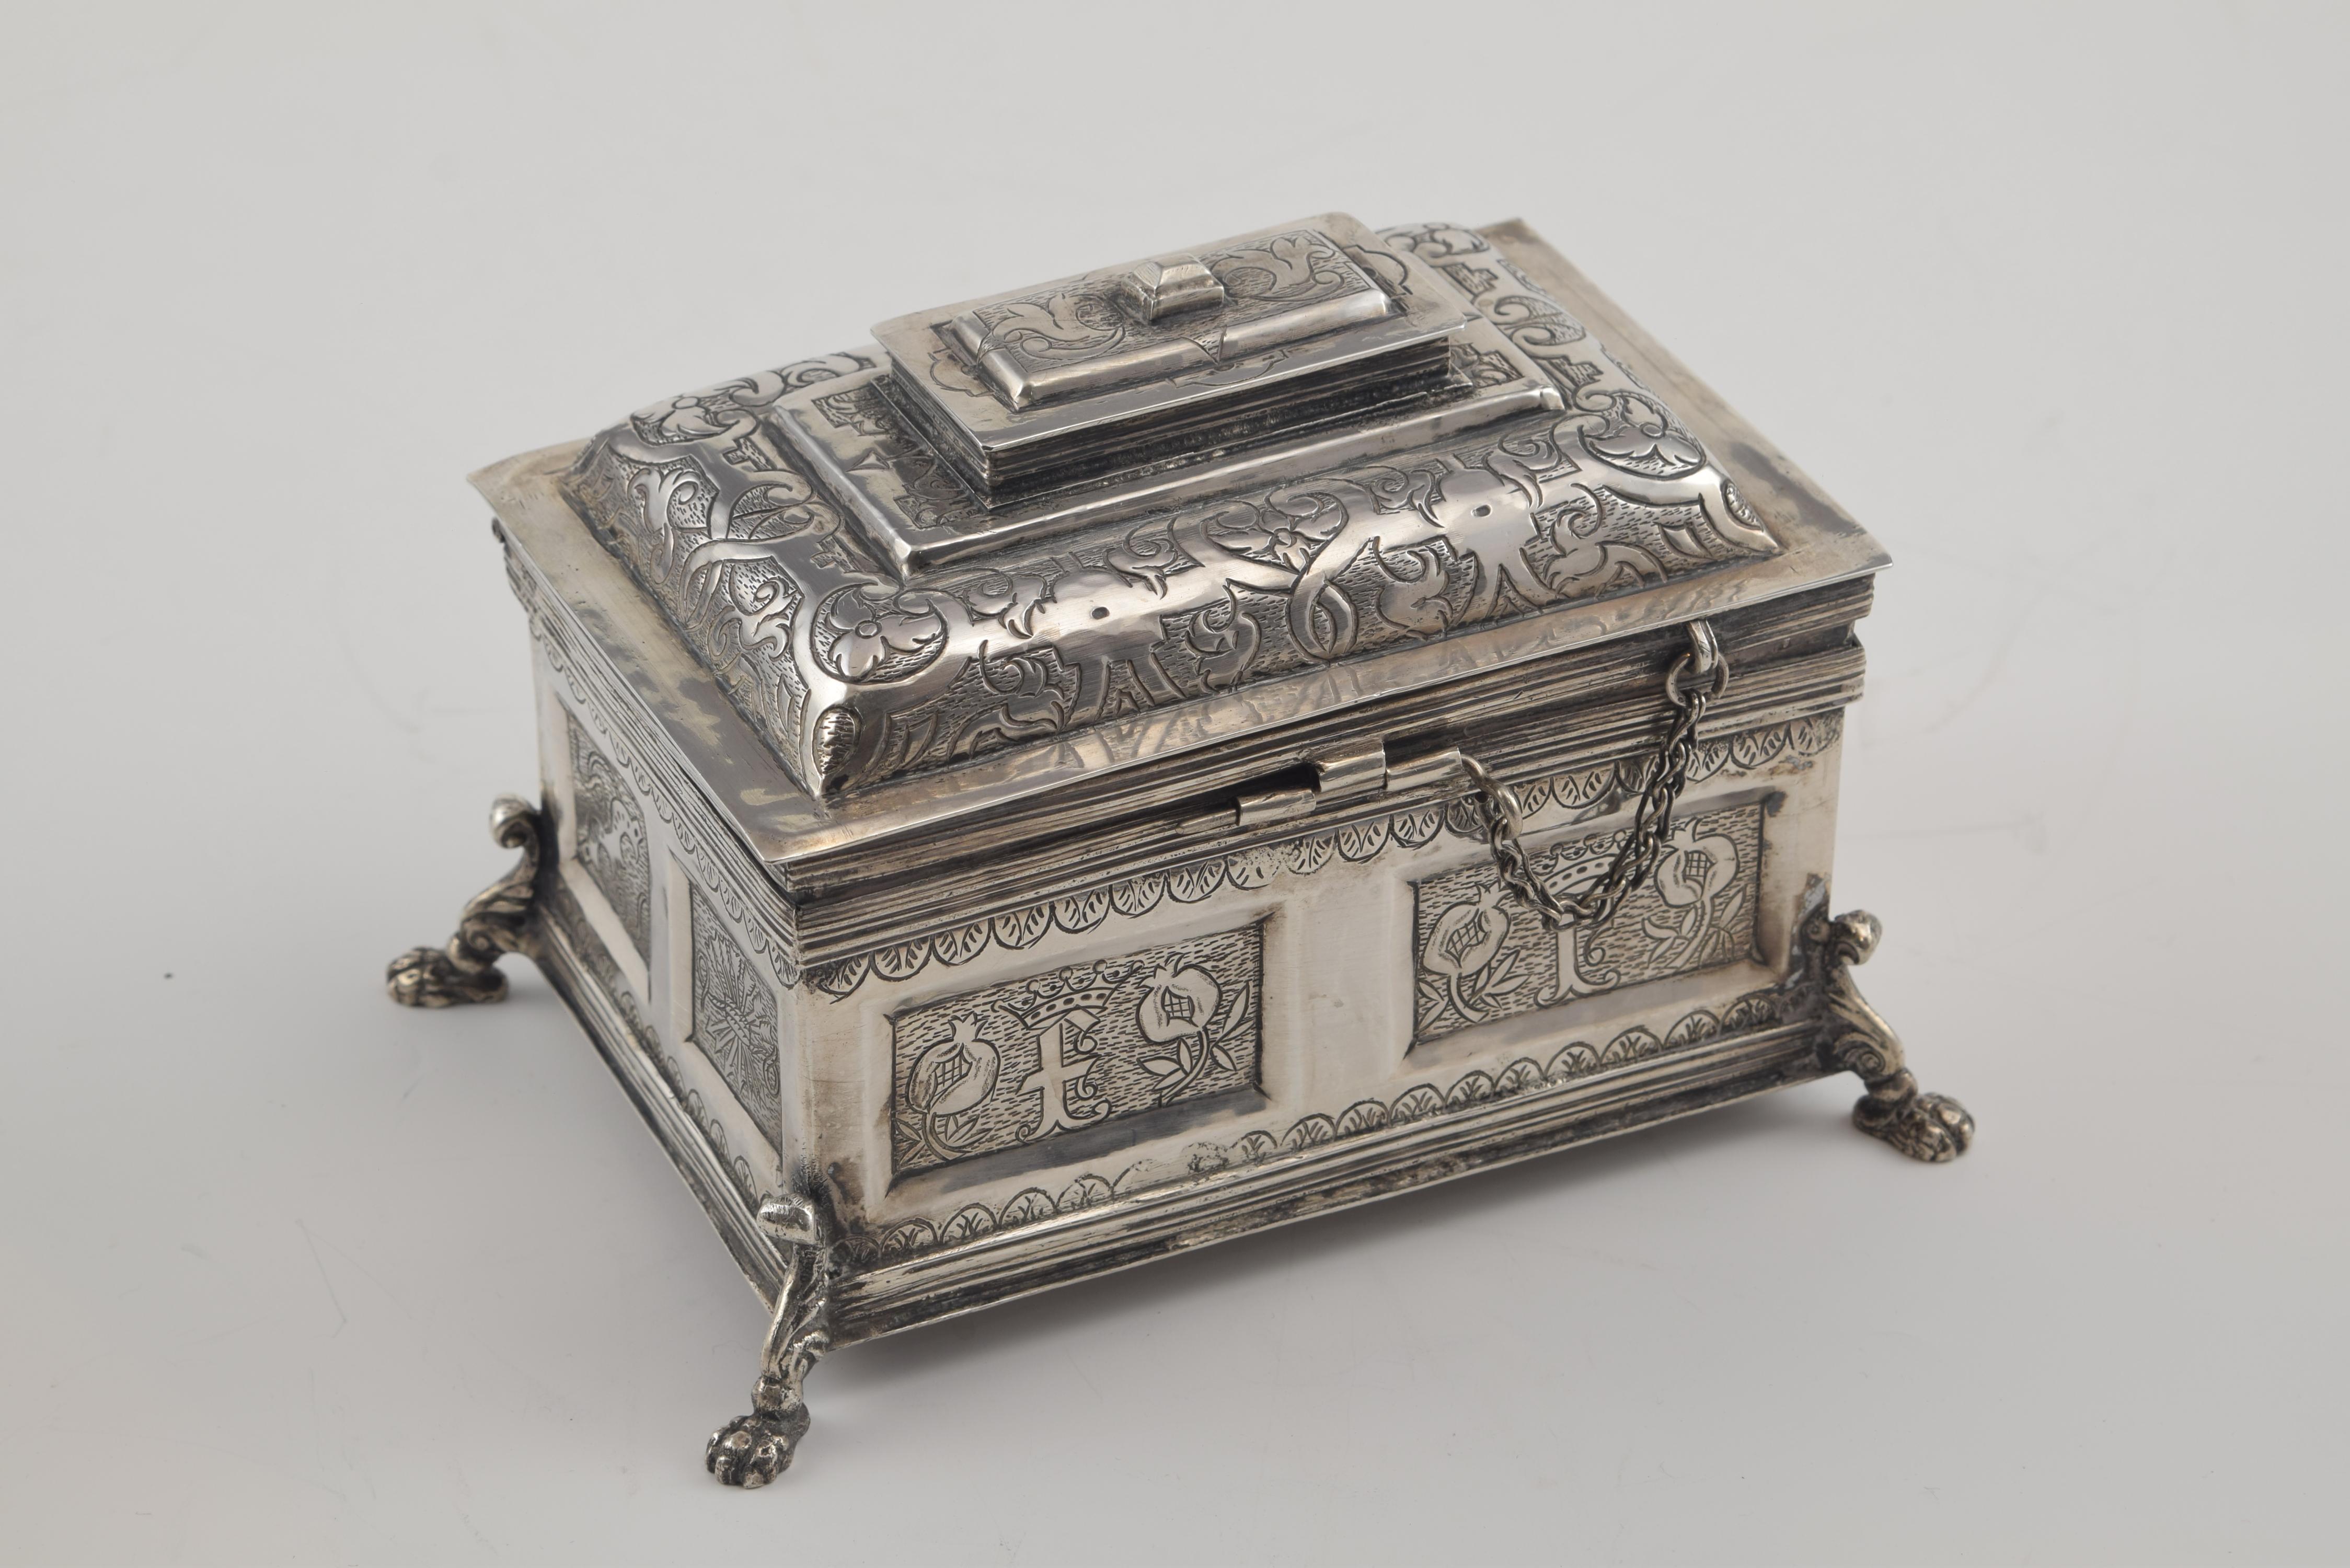 Arquette inspired by 17th century models. Silver, Spain, 20th century
Rectangular casket made of silver in its color, with four legs in the corners in the form of roll and finished in claw, decorated on the fronts with a decoration of moldings,